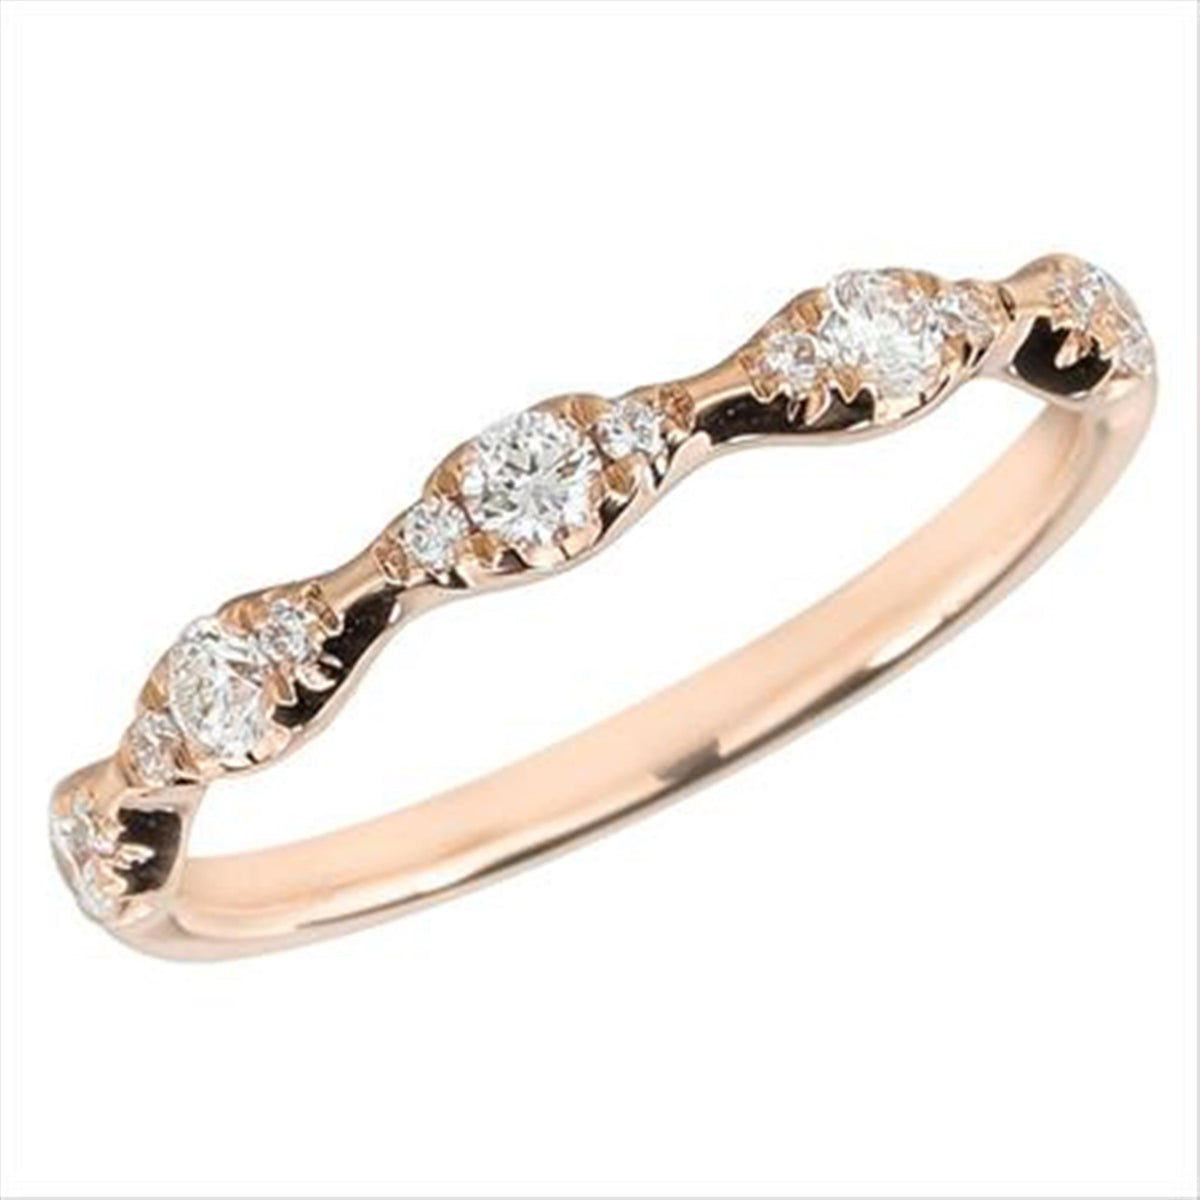 14Kt Rose Gold Stackable Wedding Ring With 0.31cttw Natural Diamonds